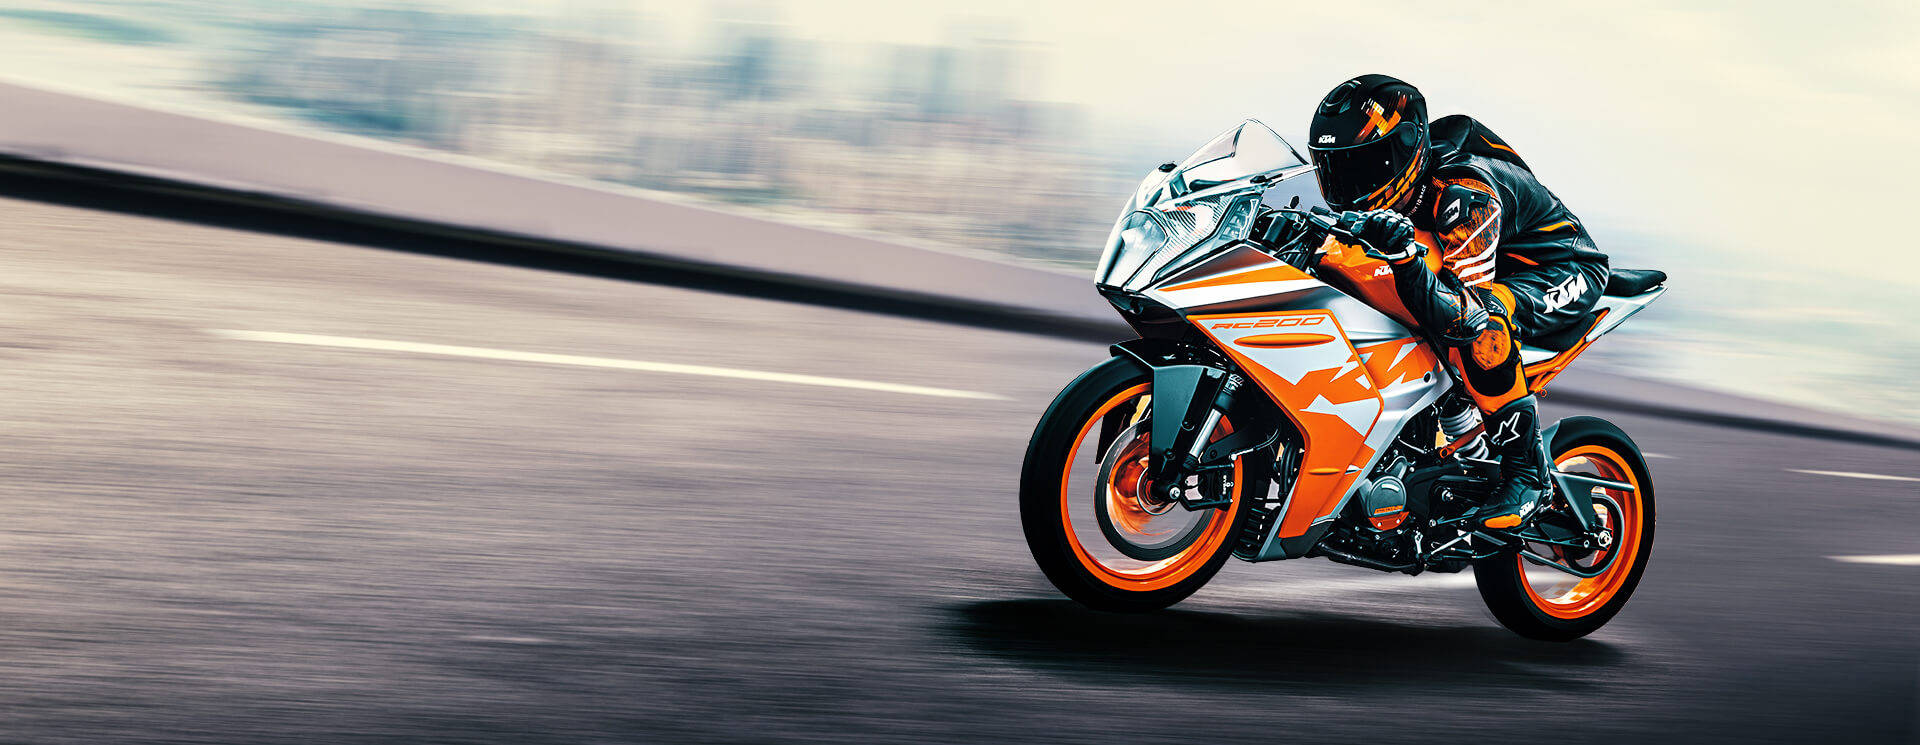 Zooming Ktm Rc 200 Background